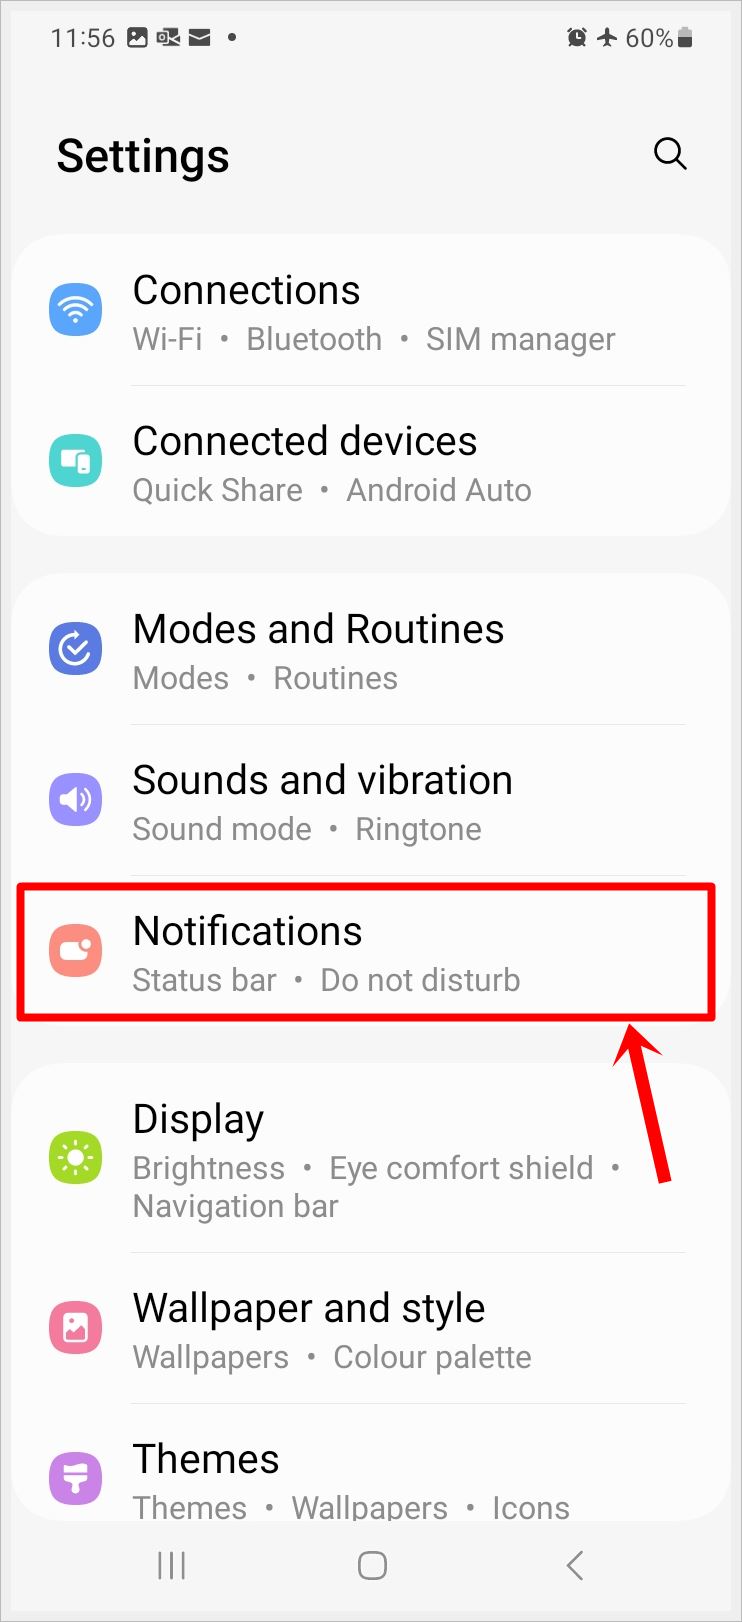 This image is a screenshot of the Settings menu of an Android phone. The 'Notifications' option is highlighted.